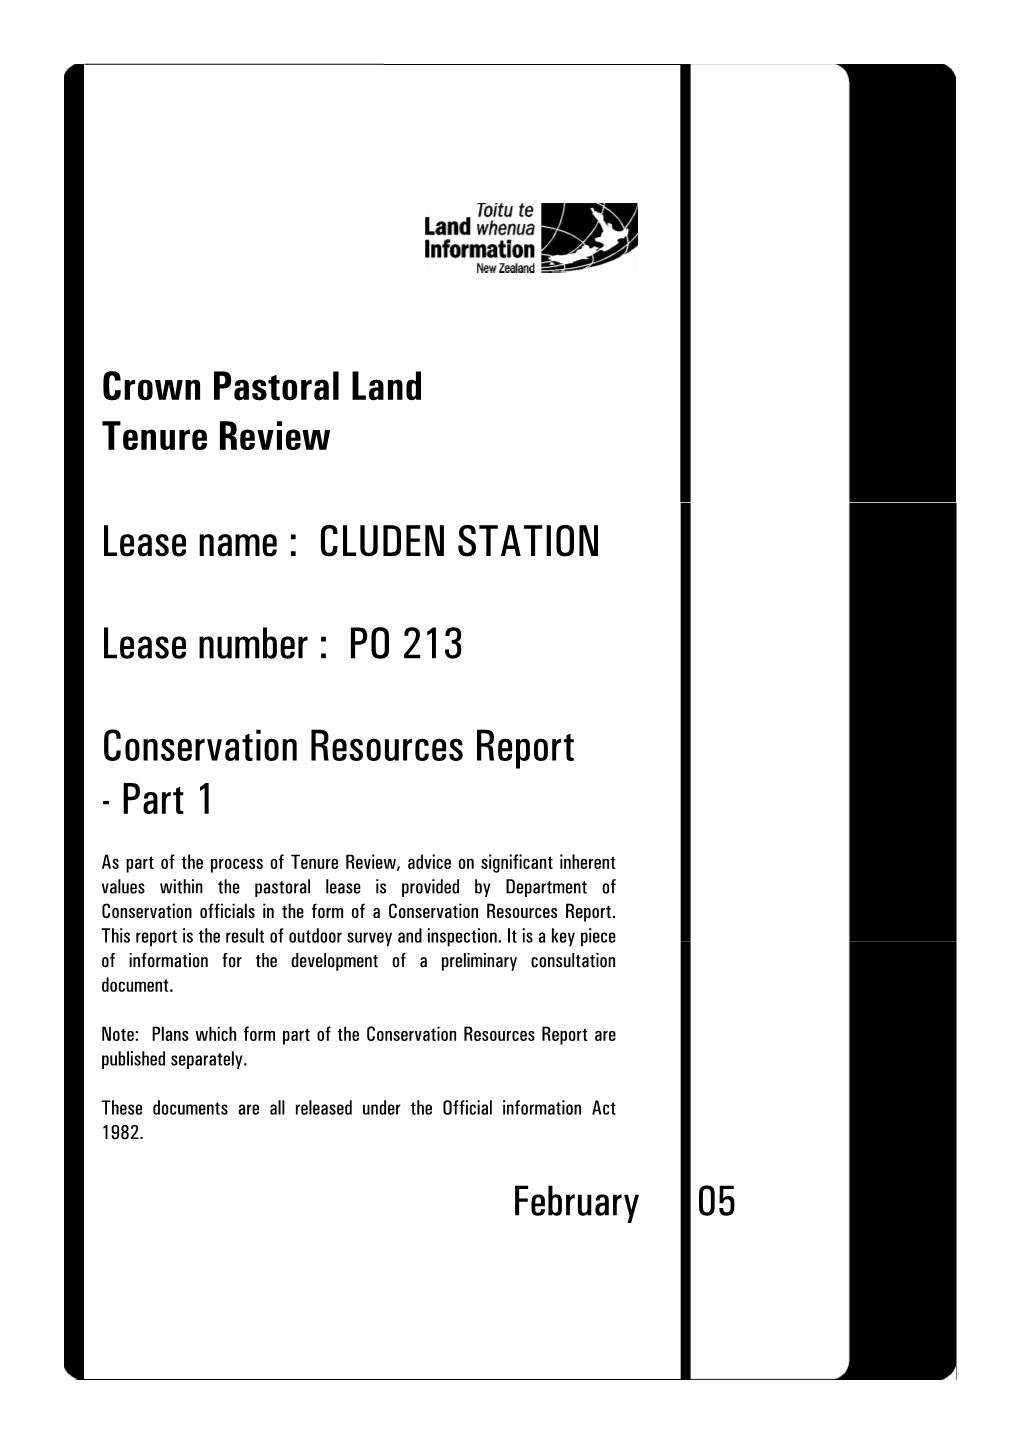 Crown Pastoral-Tenure Review-Cluden-Station-Conservation Resources Report